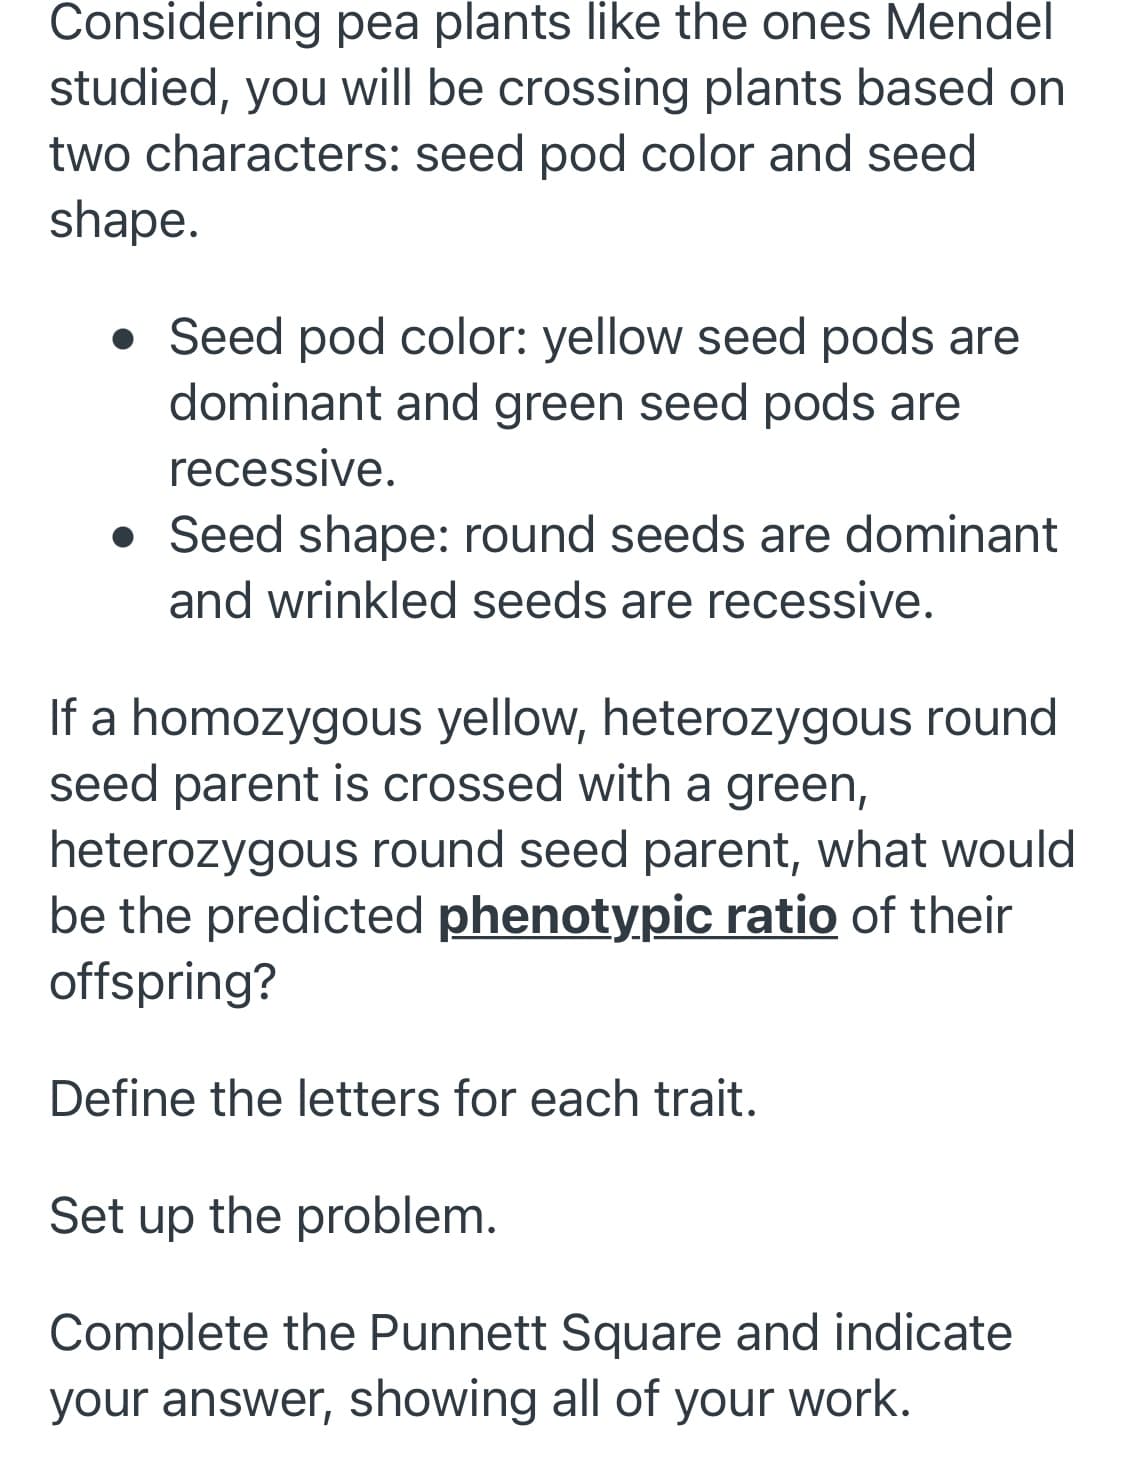 Considering pea plants like the ones Mendel
studied, you will be crossing plants based on
two characters: seed pod color and seed
shape.
• Seed pod color: yellow seed pods are
dominant and green seed pods are
recessive.
• Seed shape: round seeds are dominant
and wrinkled seeds are recessive.
If a homozygous yellow, heterozygous round
seed parent is crossed with a green,
heterozygous round seed parent, what would
be the predicted phenotypic ratio of their
offspring?
Define the letters for each trait.
Set up the problem.
Complete the Punnett Square and indicate
your answer, showing all of
your work.
